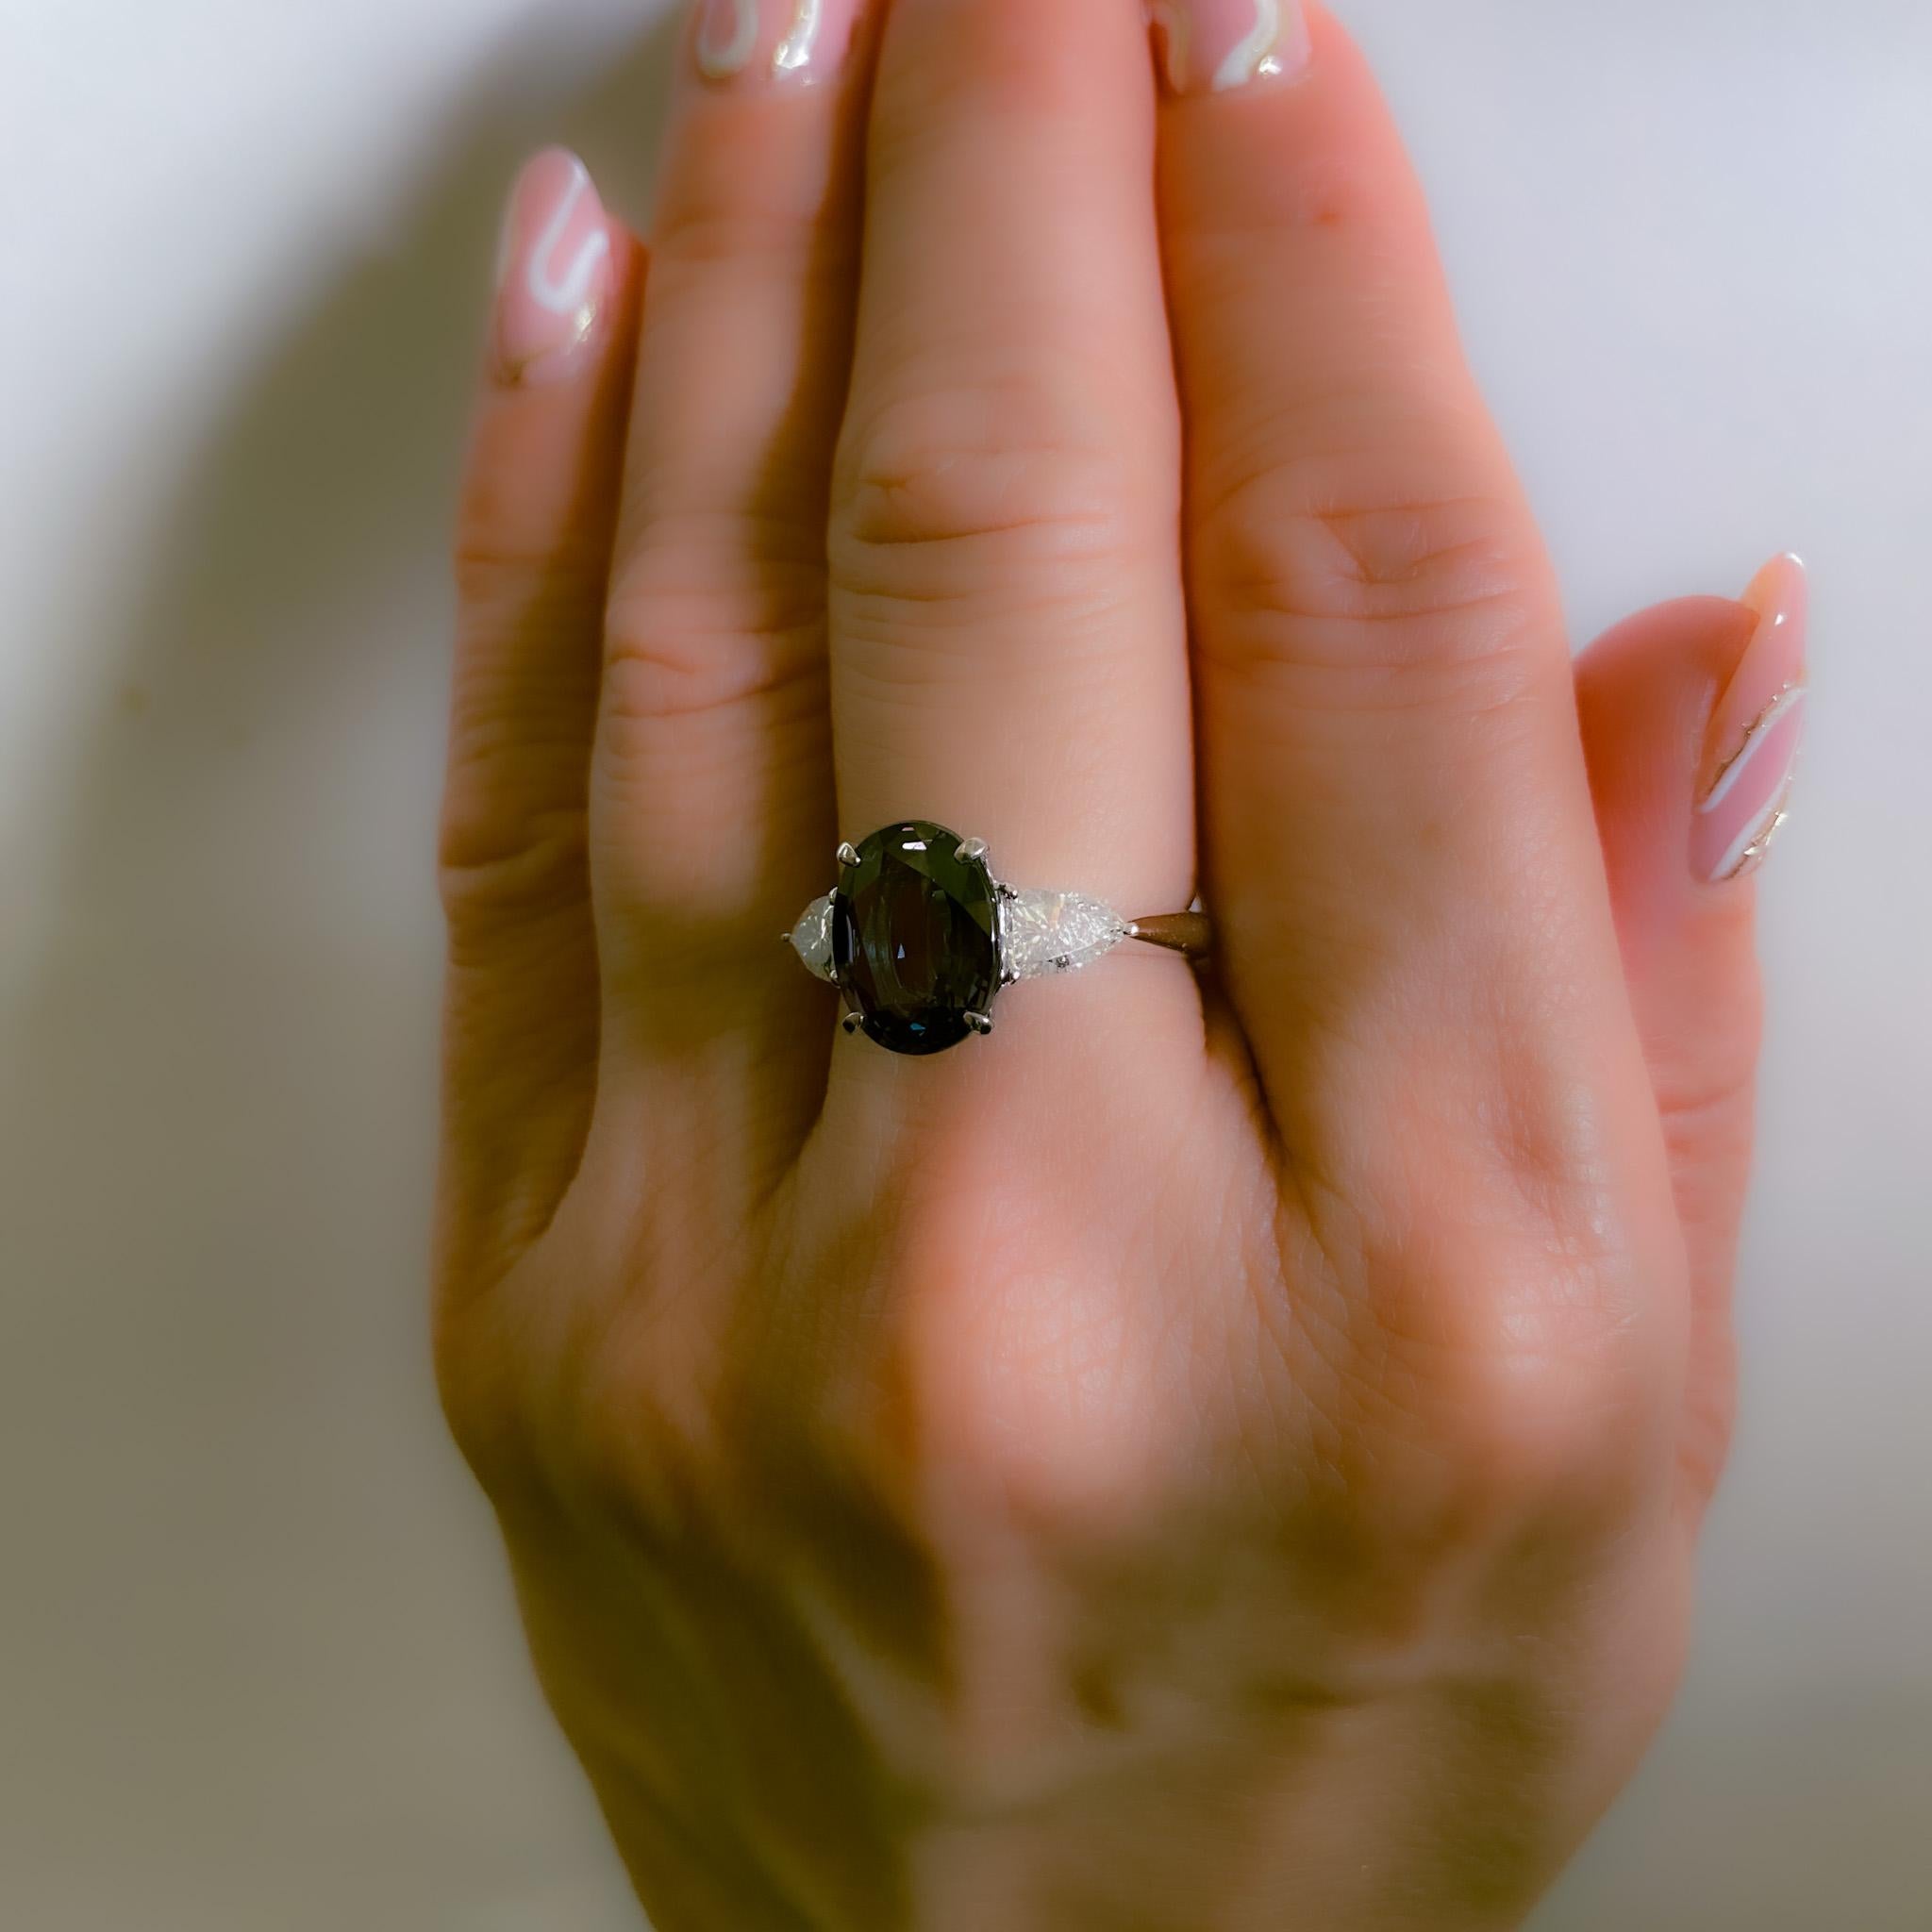 This one-of-a-kind marvel is extremely rare in existence. Alexandrite at sizes greater than 1 carat are rarely found across all geographic sources, to begin with, but 1-carat stones from Brazil are even rarer.  The ring centers a beautiful and fine